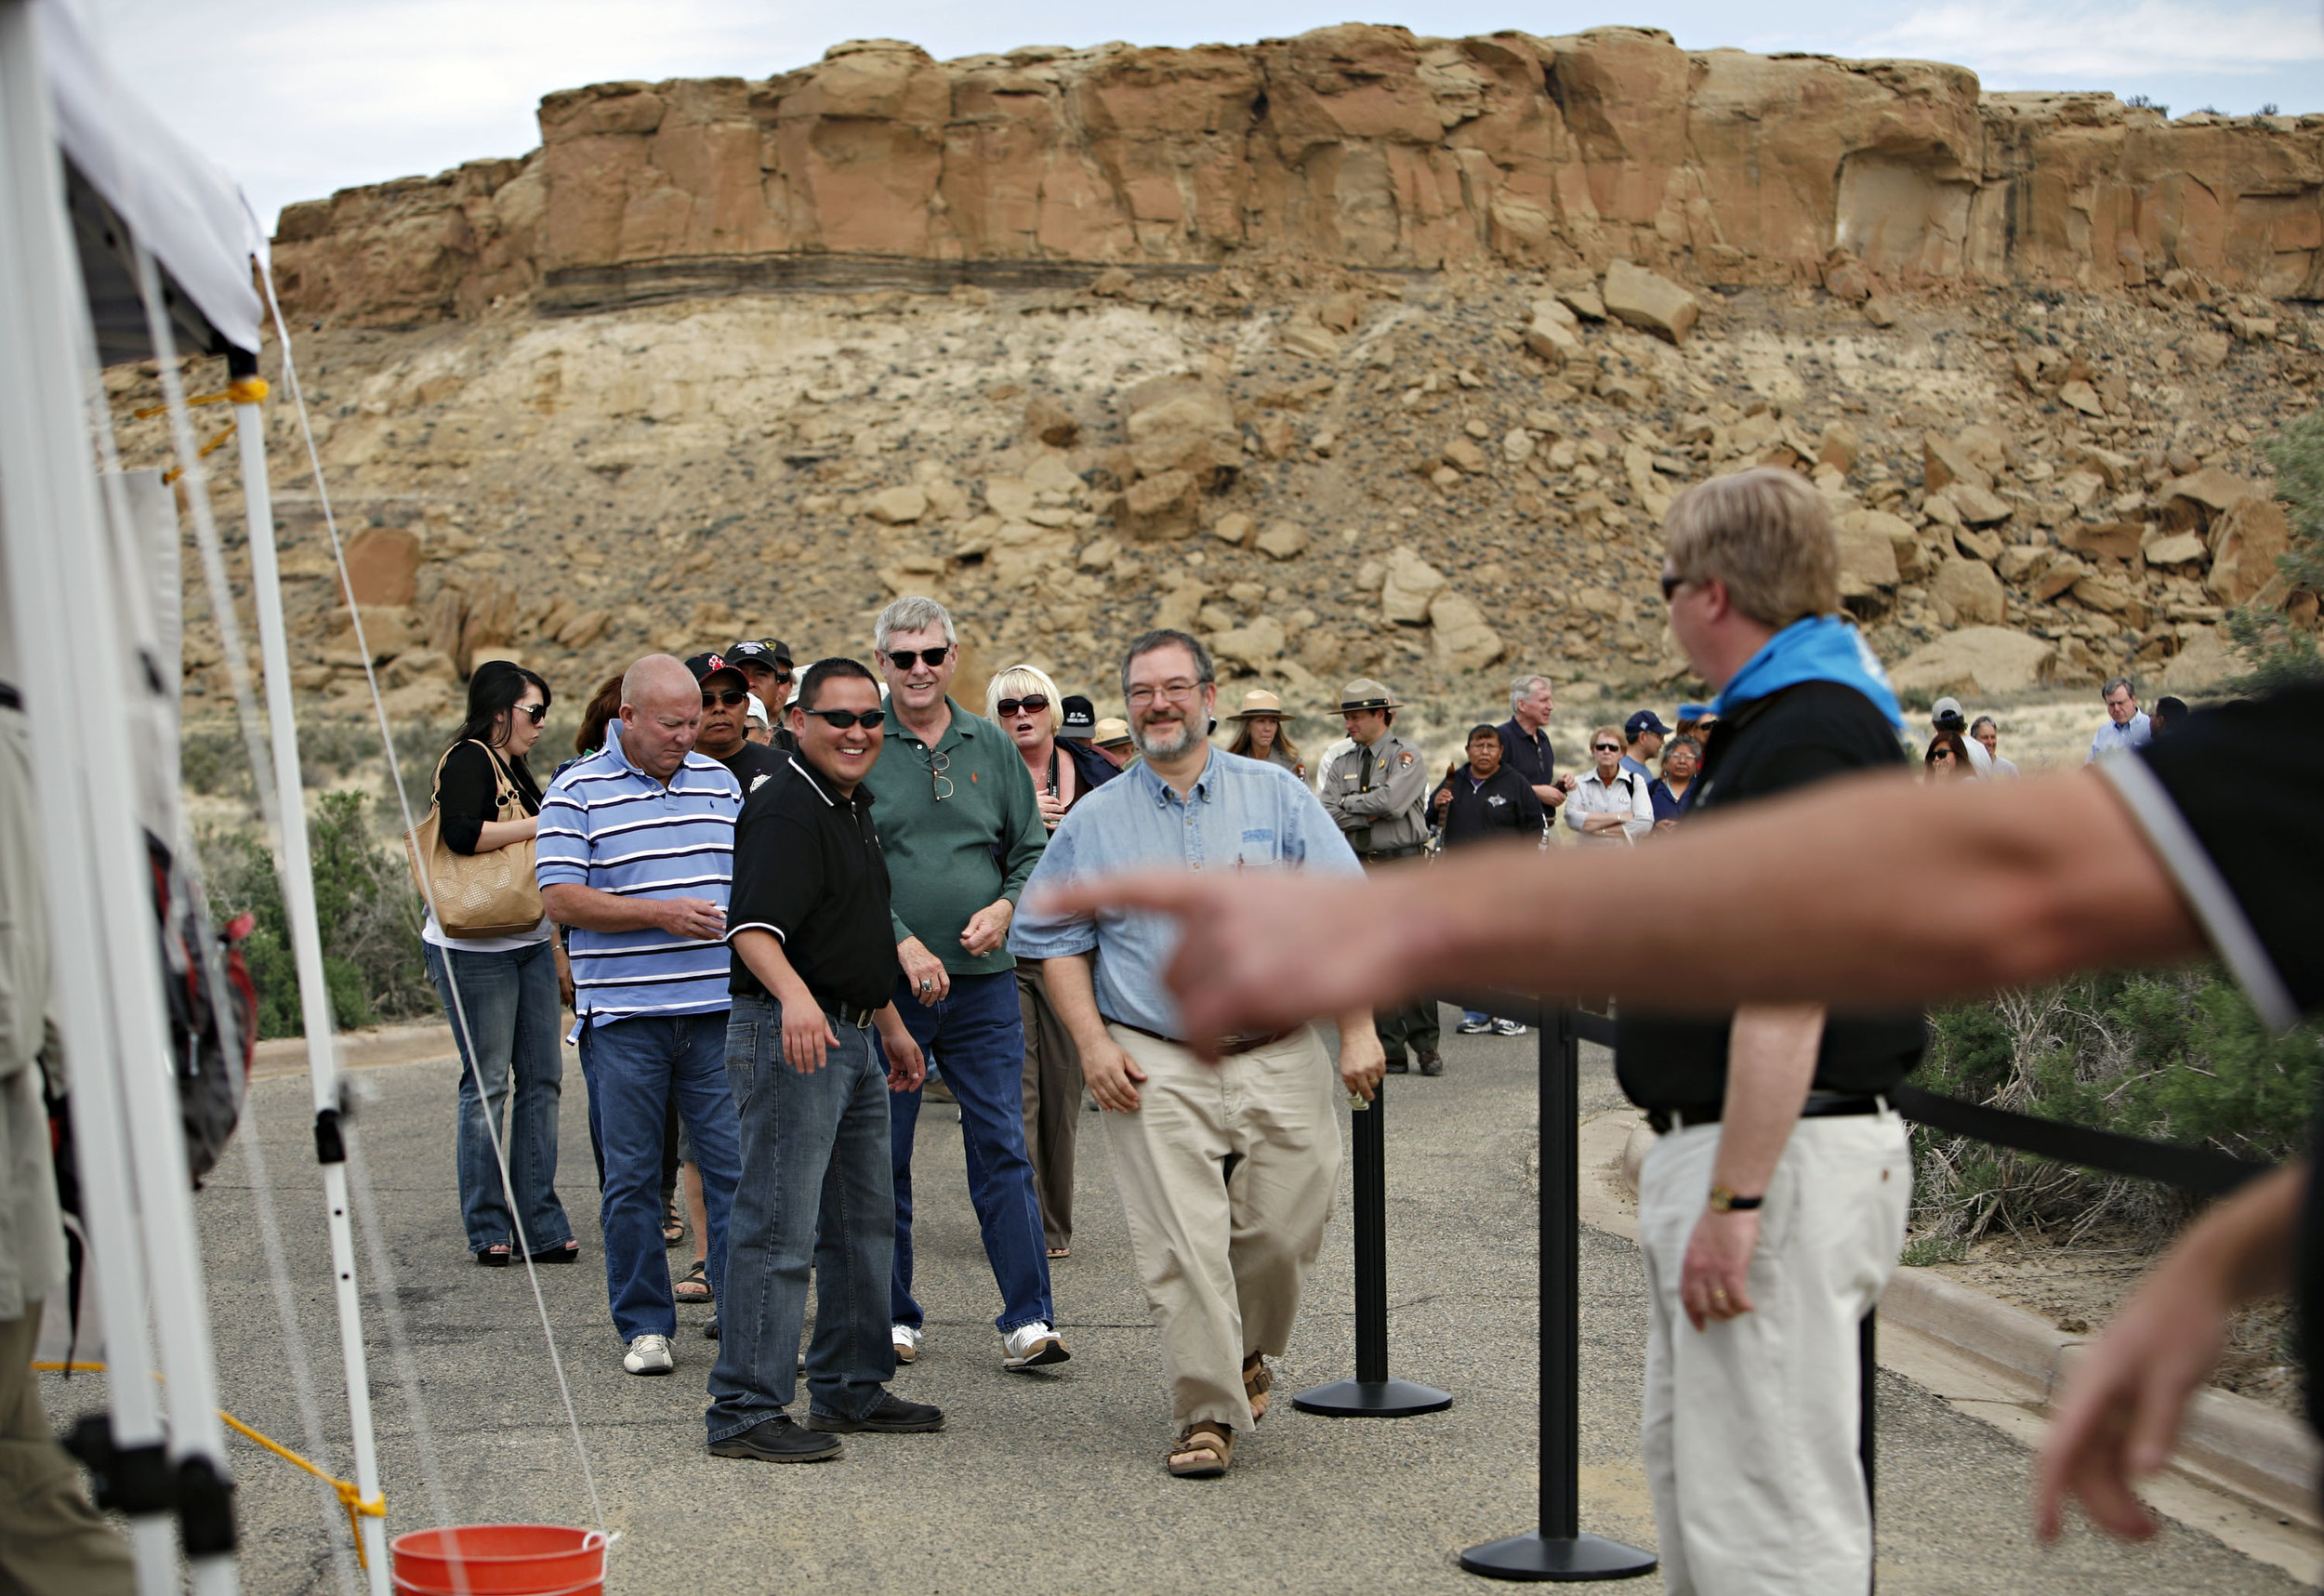  People line up to exchange their money for the new Chaco Canyon quarters during the quarter launch at Chaco Canyon, Thursday, April 26, 2012. (Morgan Petroski/Albuquerque Journal) 